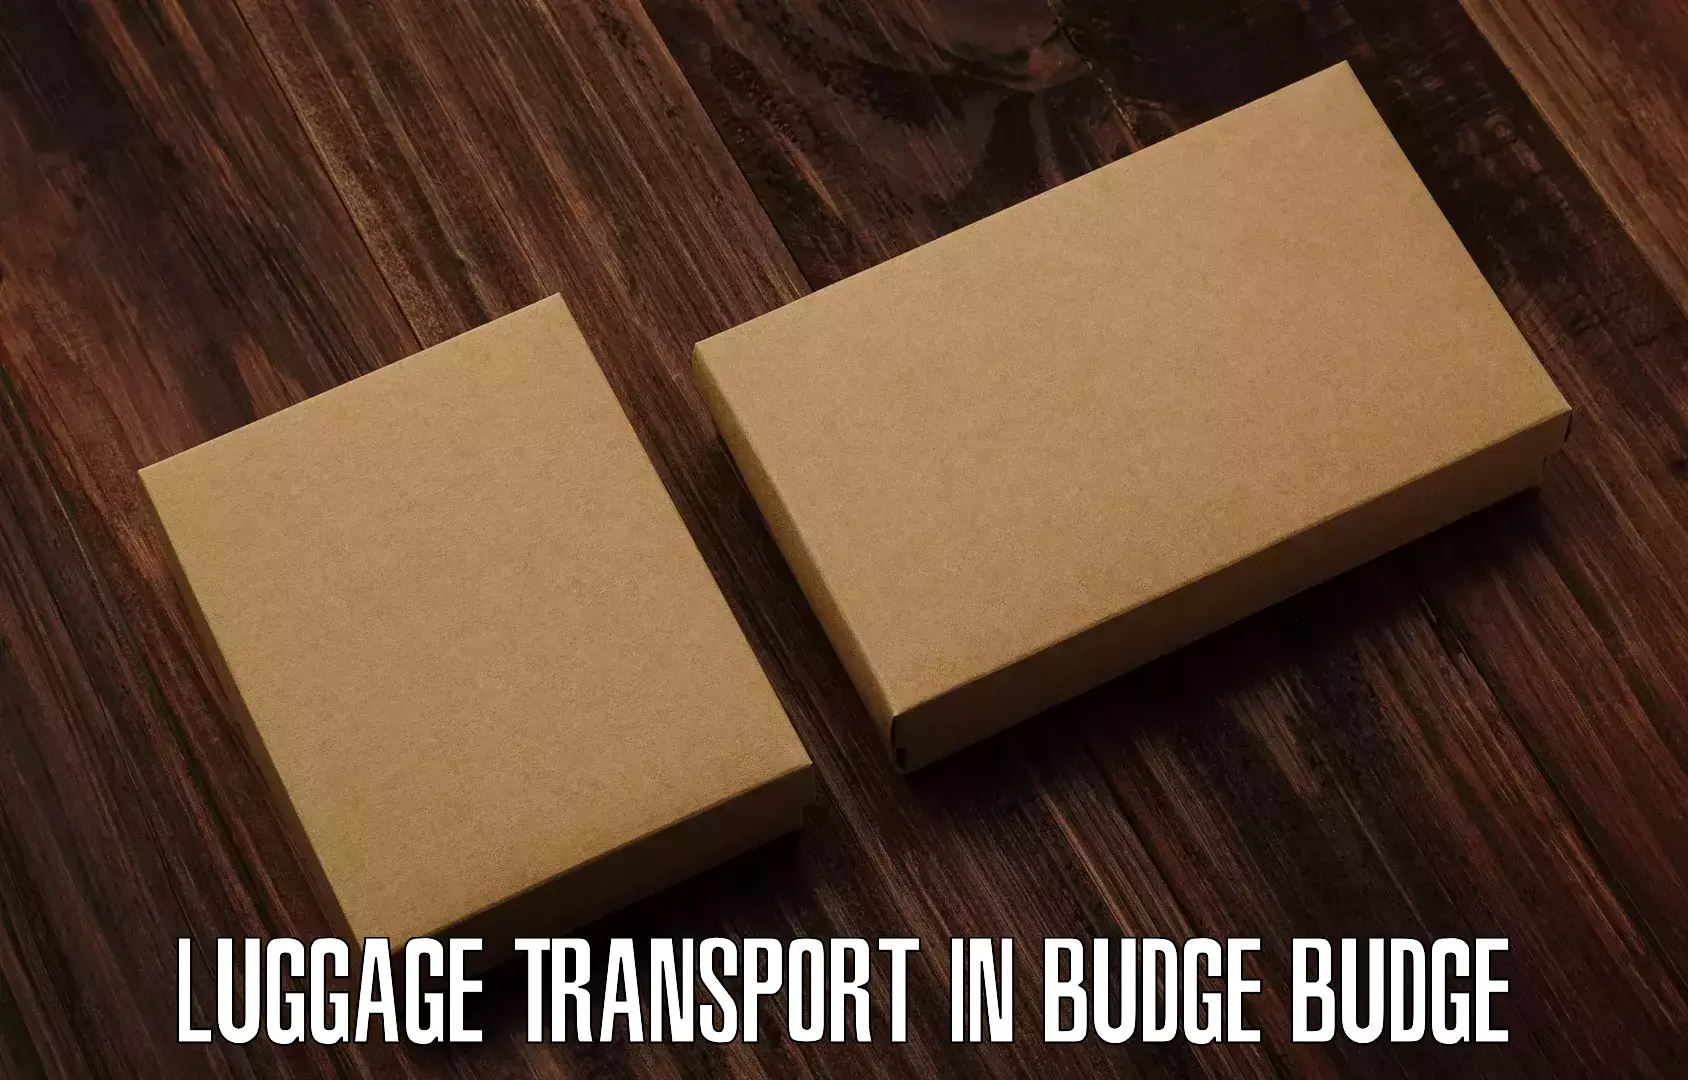 Baggage transport scheduler in Budge Budge